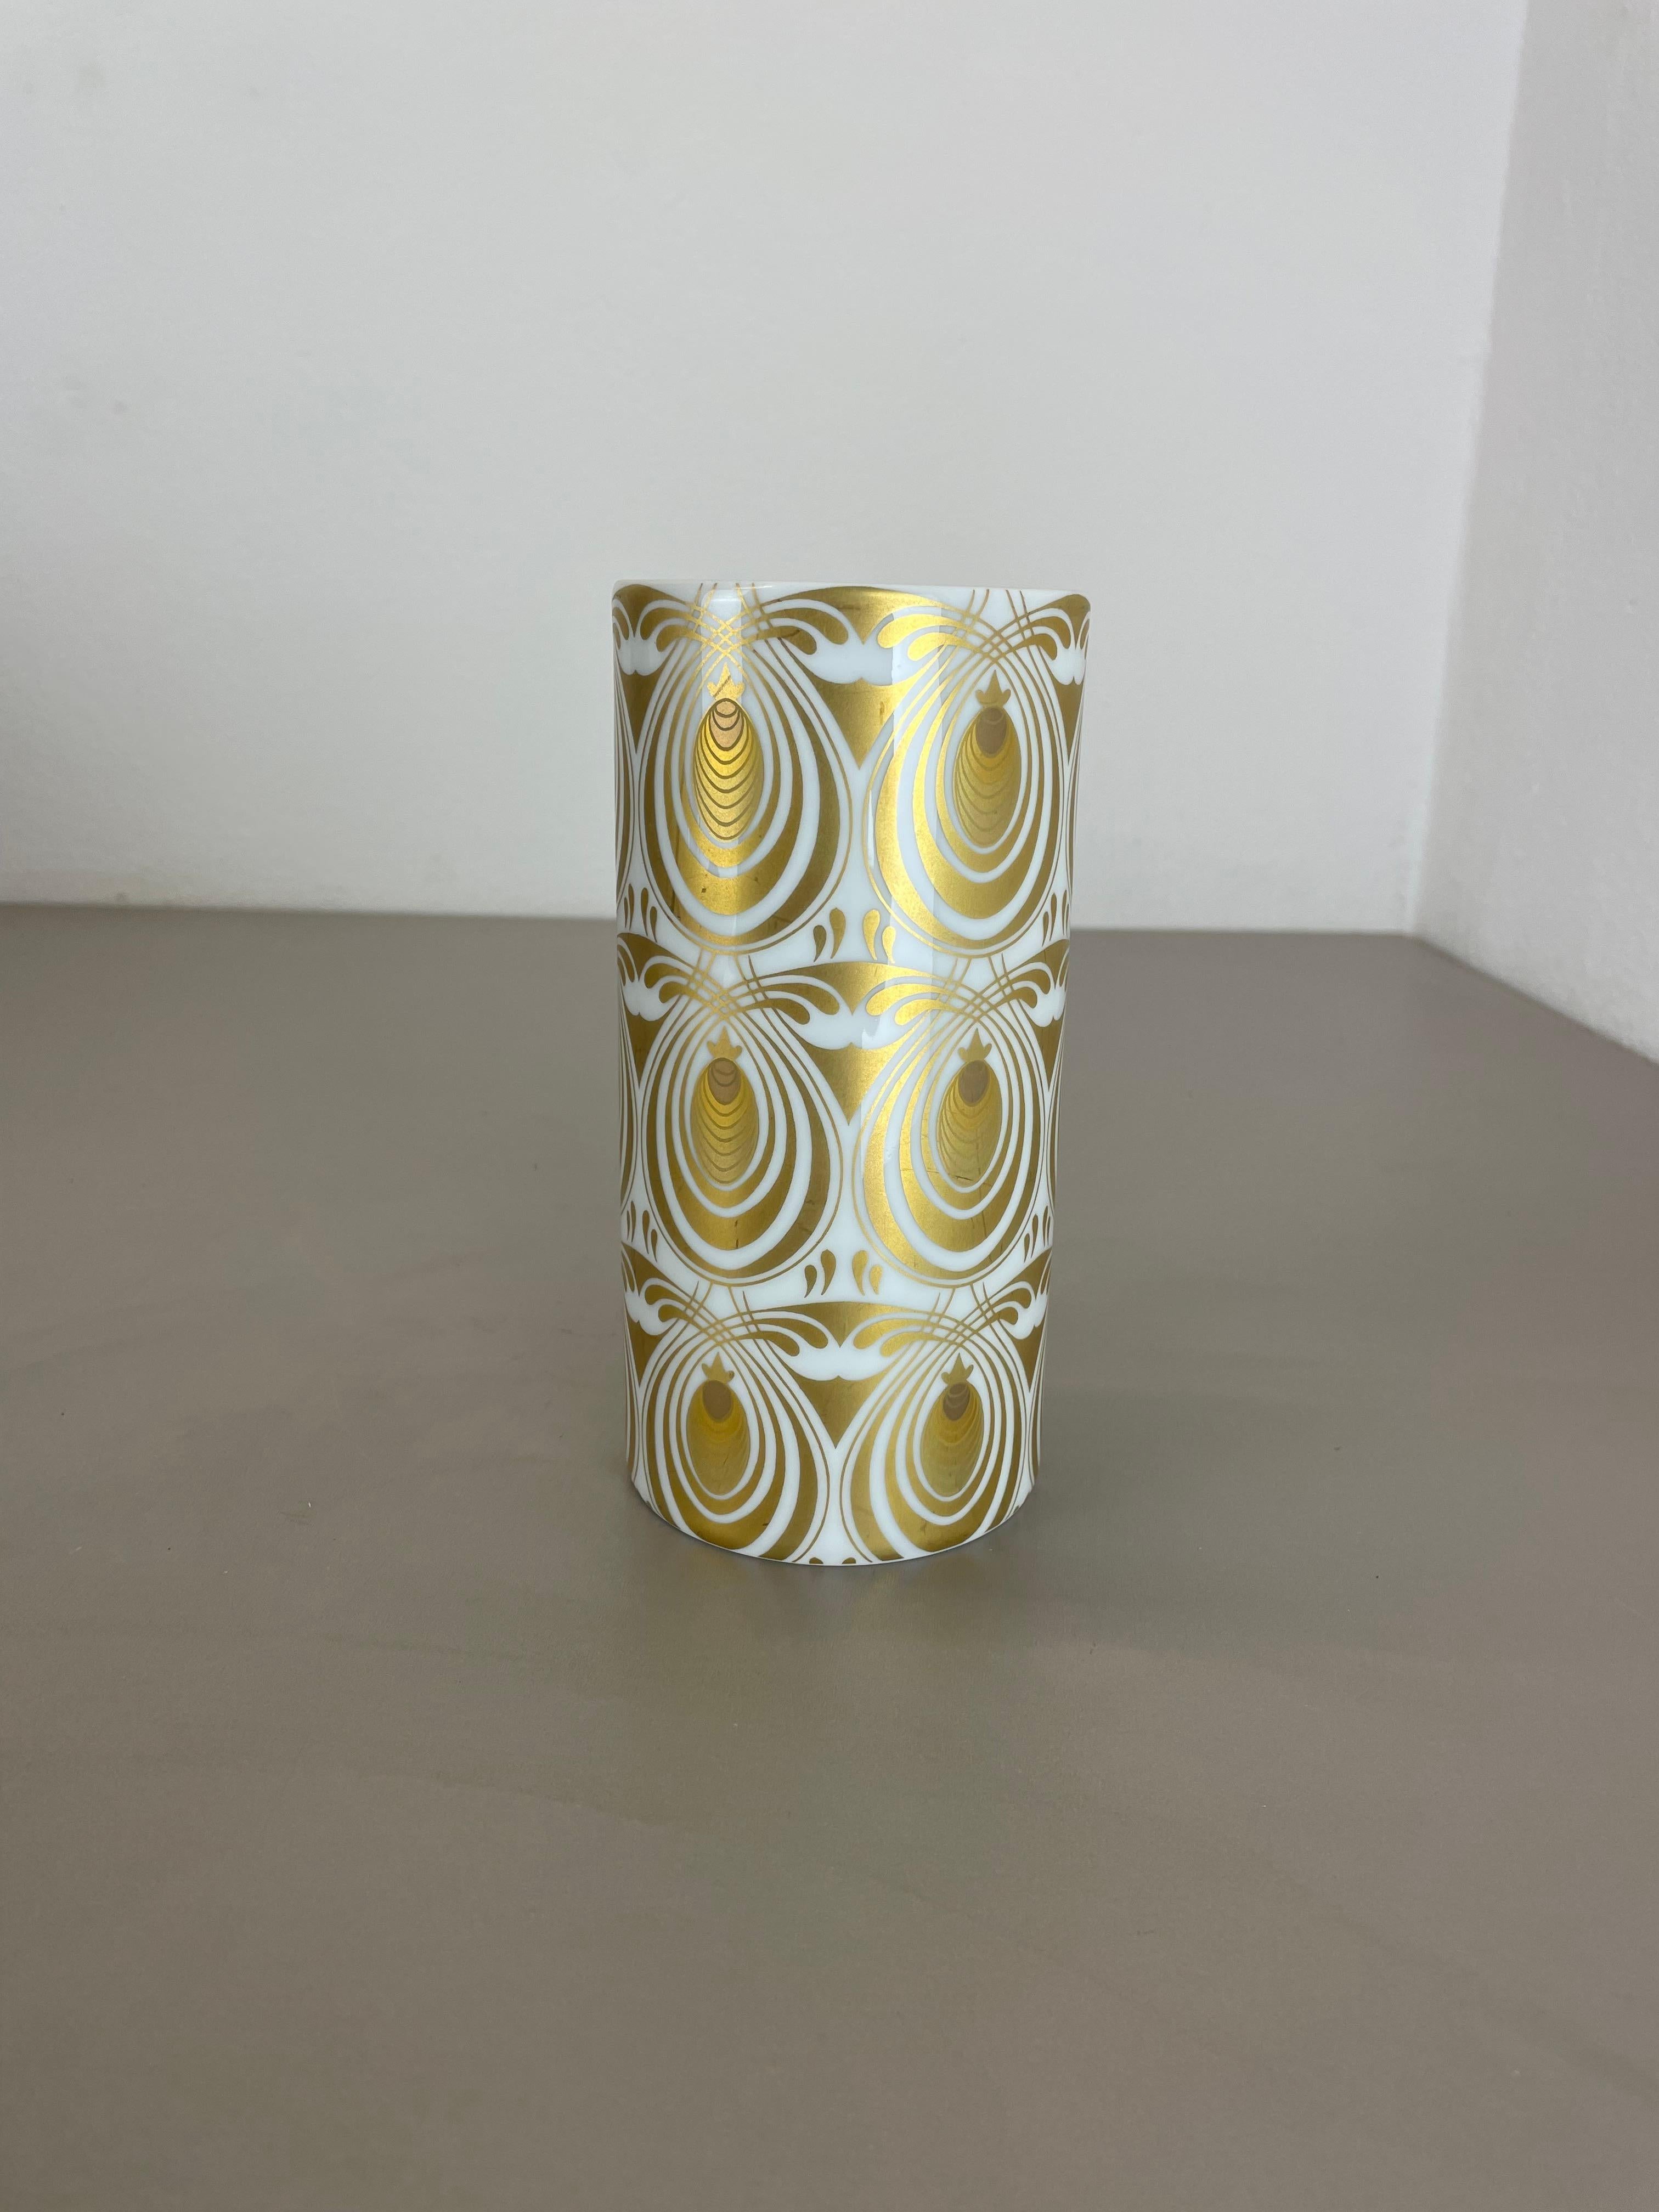 Article:

Op Art porcelain vase


Producer:

Rosenthal, Germany


Designer:

Björn Wiinblad



Decade:

1970s





This original vintage Op Art vase was produced in the 1970s in Germany by Rosenthal. It is made of porcelain and has a fantastic